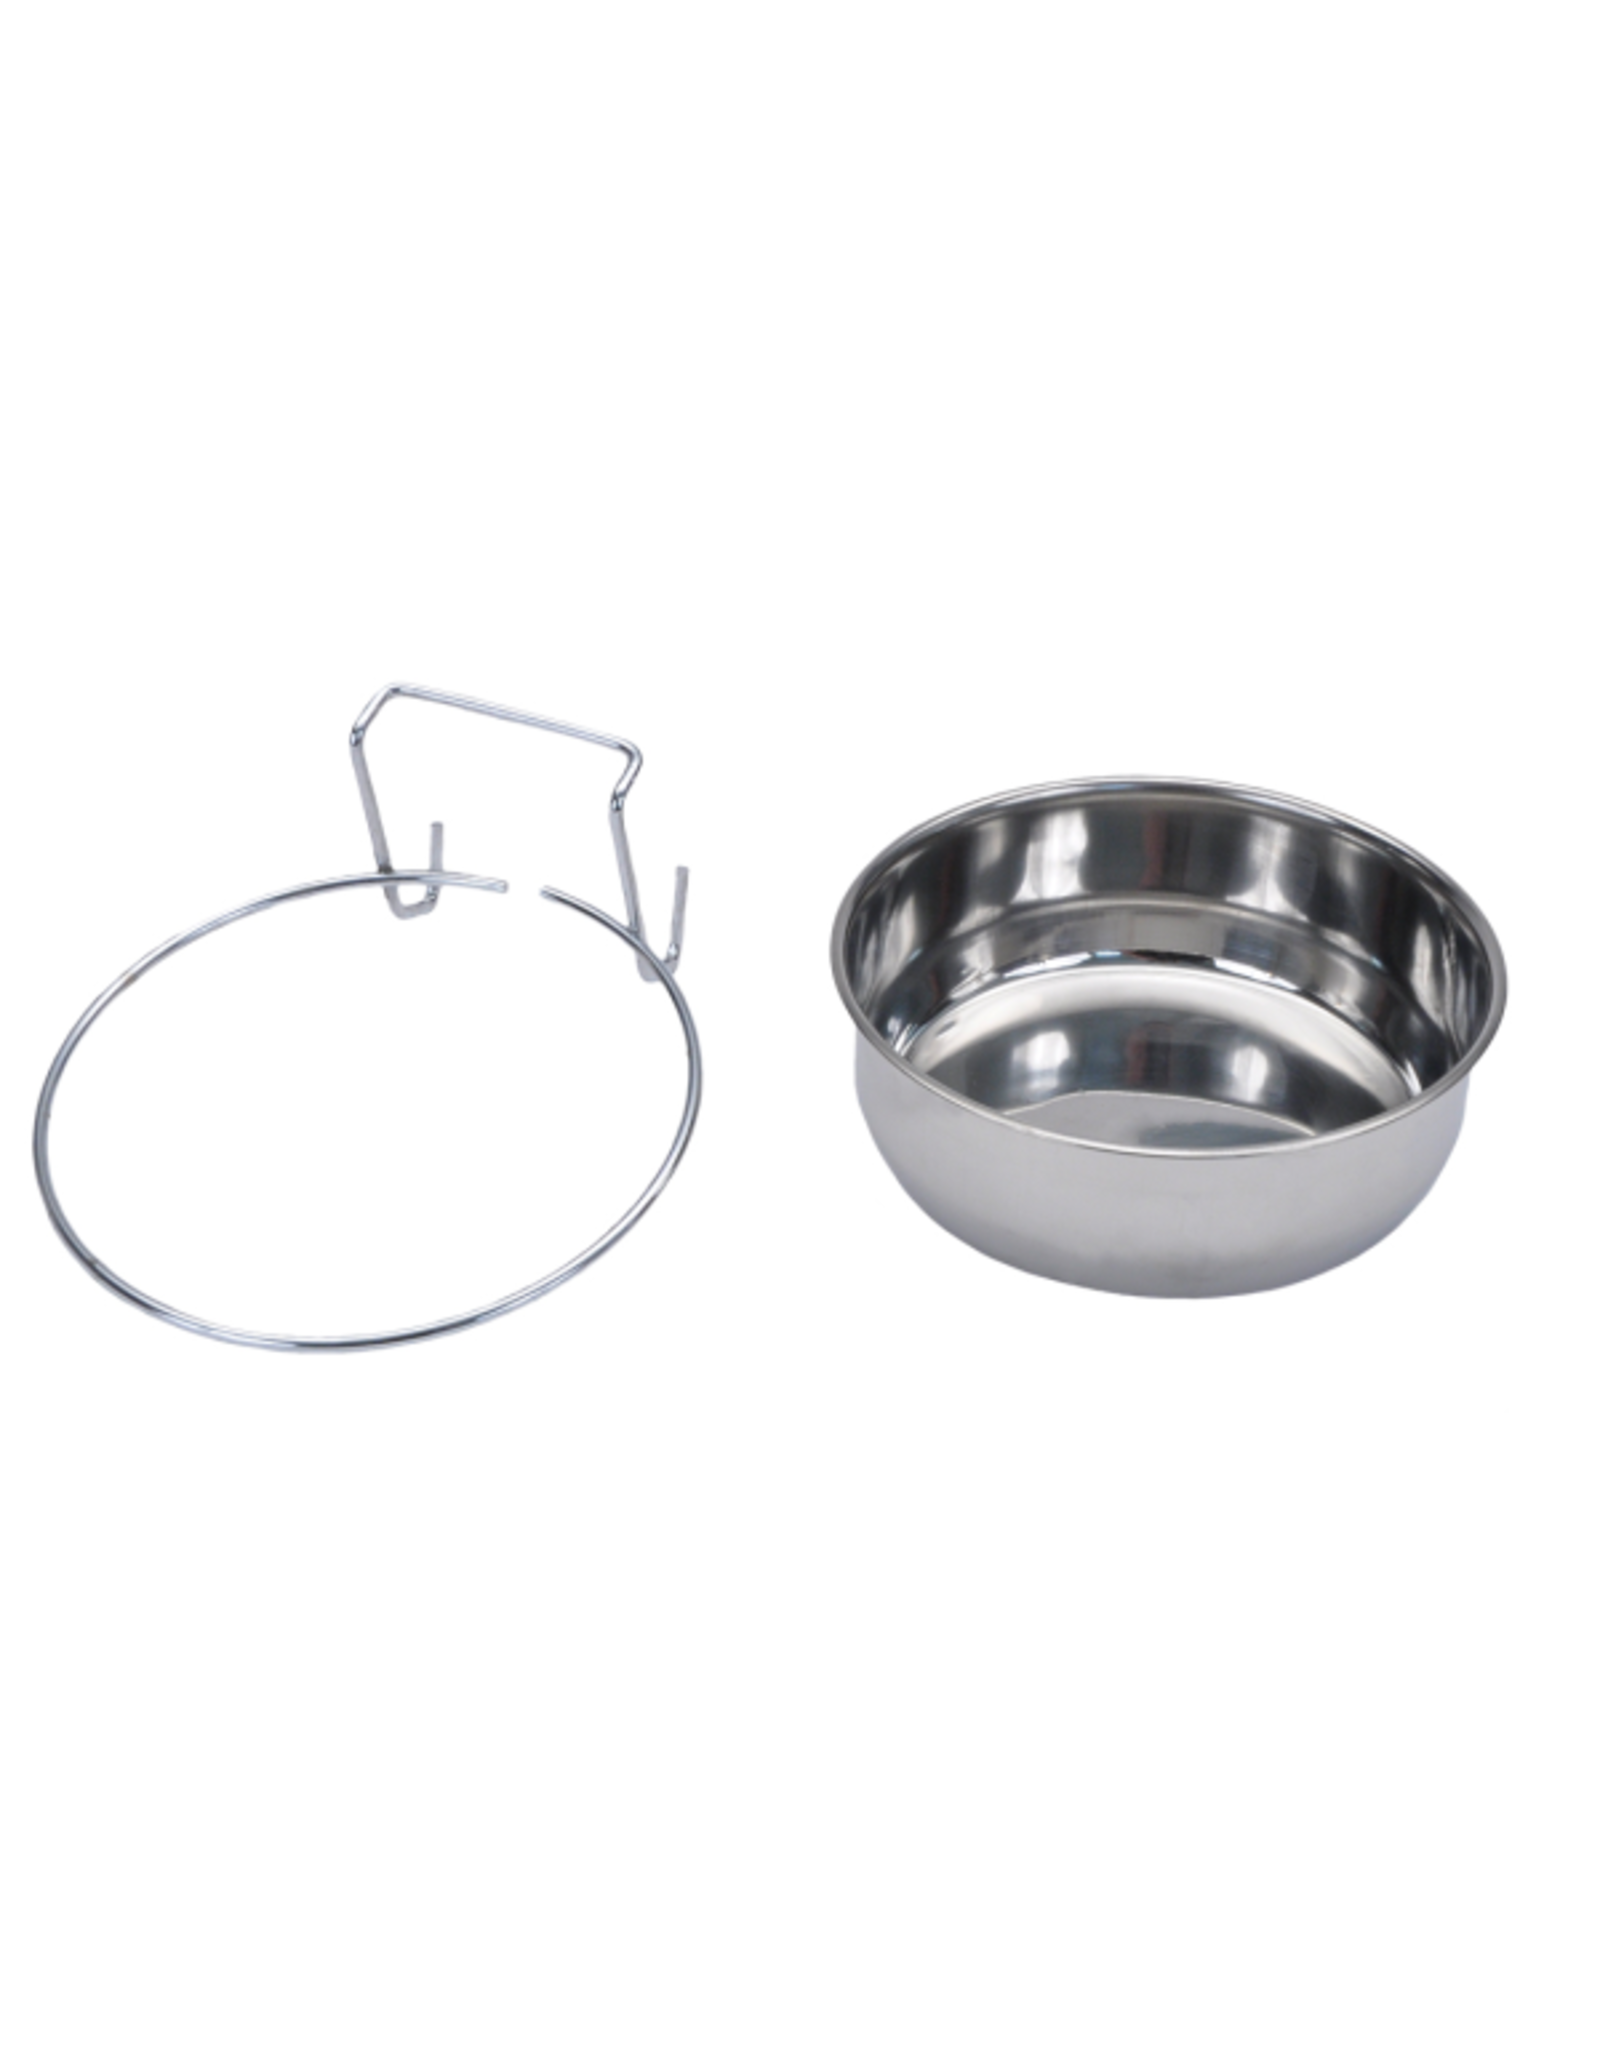 Coastal Coastal Stainless Kennel Bowl 1 Cup